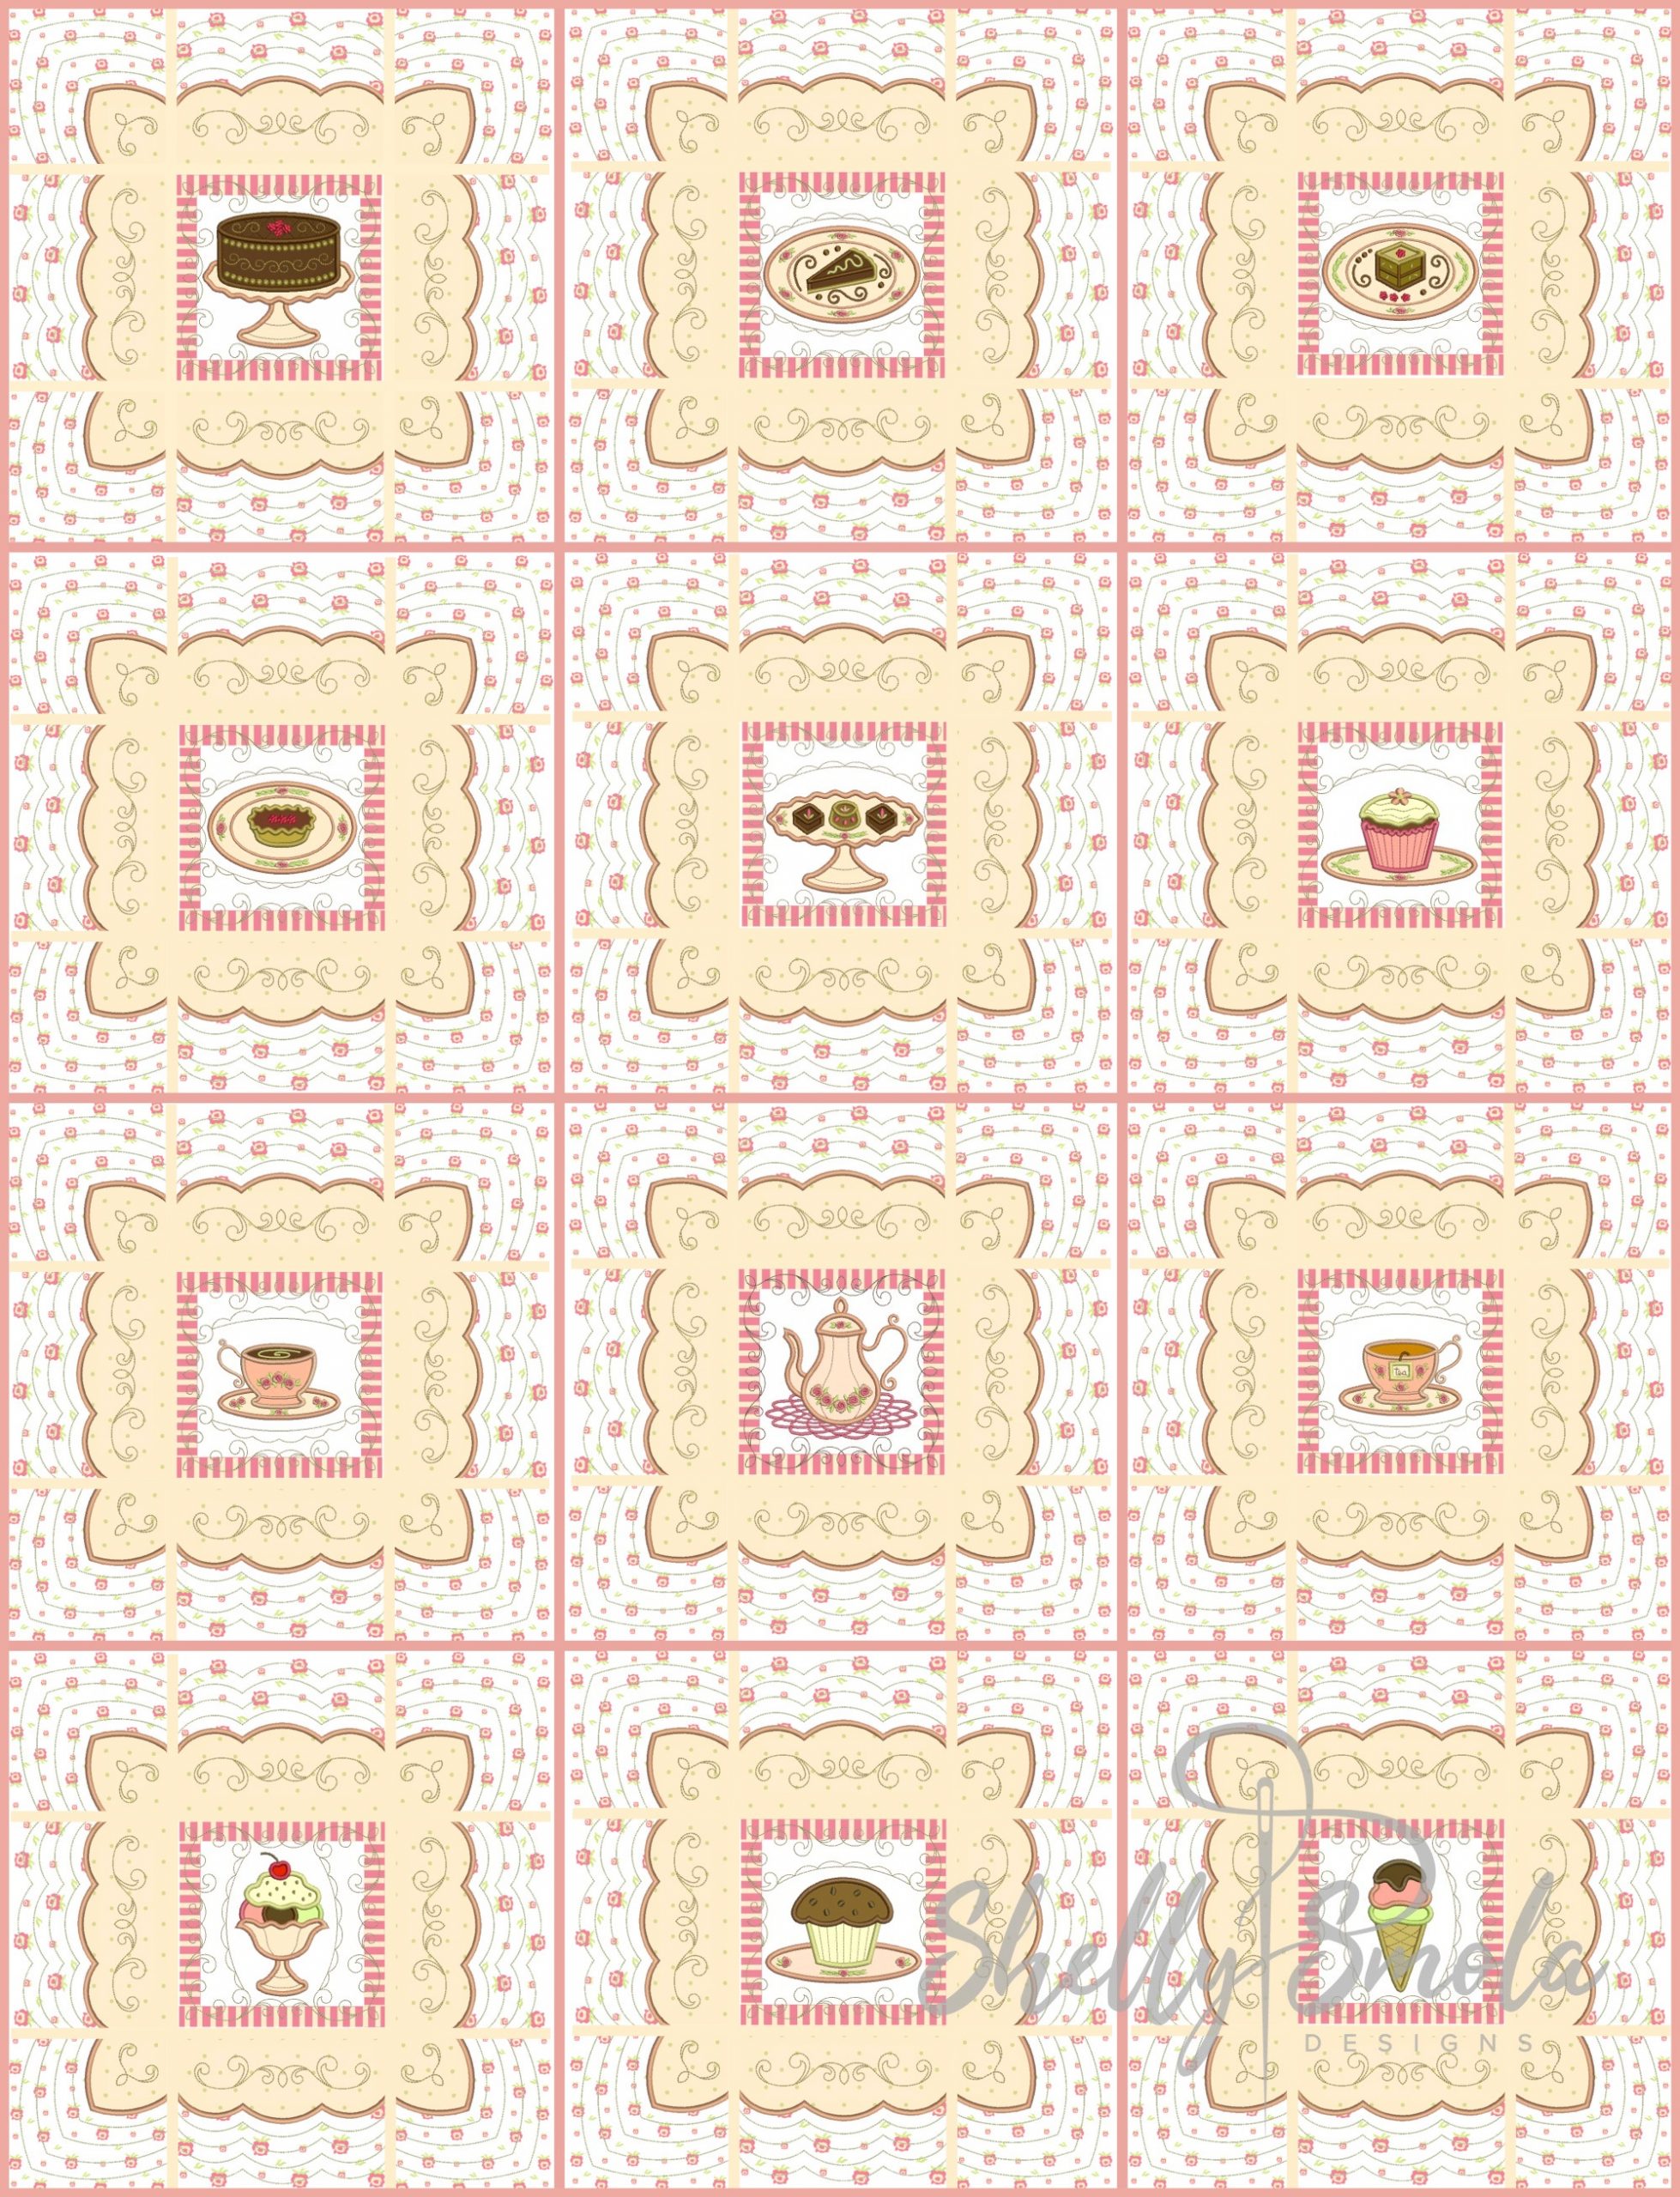 Sweet Temptations Quilt Layout Idea by Shelly Smola